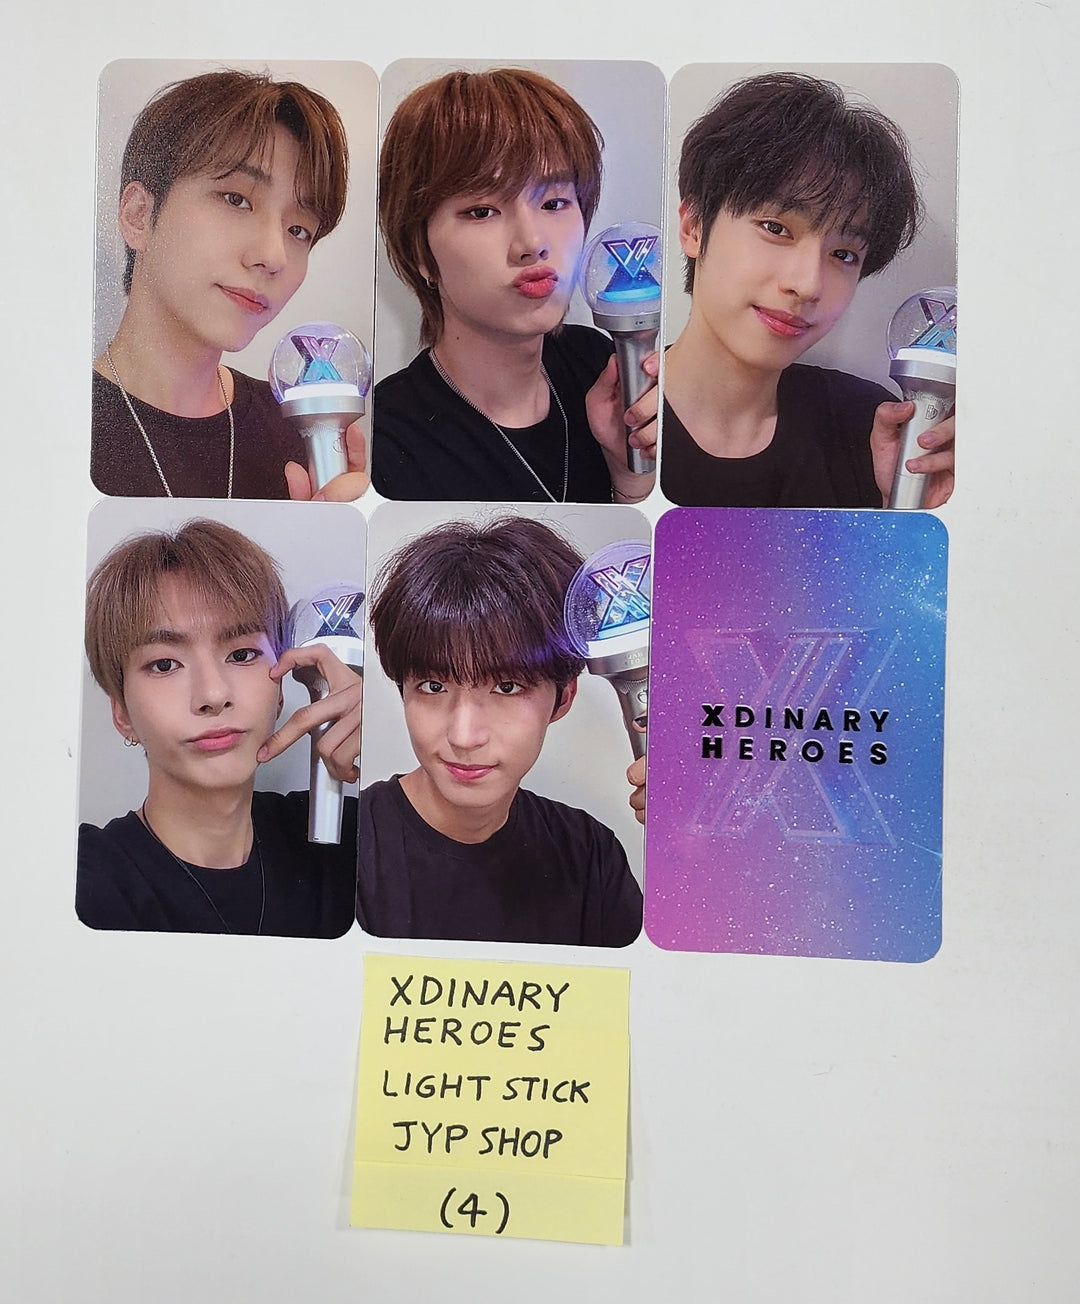 Xdinary Heroes "OFFICIAL LIGHT STICK " - JYP Shop Pre-Order Benefit Photocards Set [6EA]